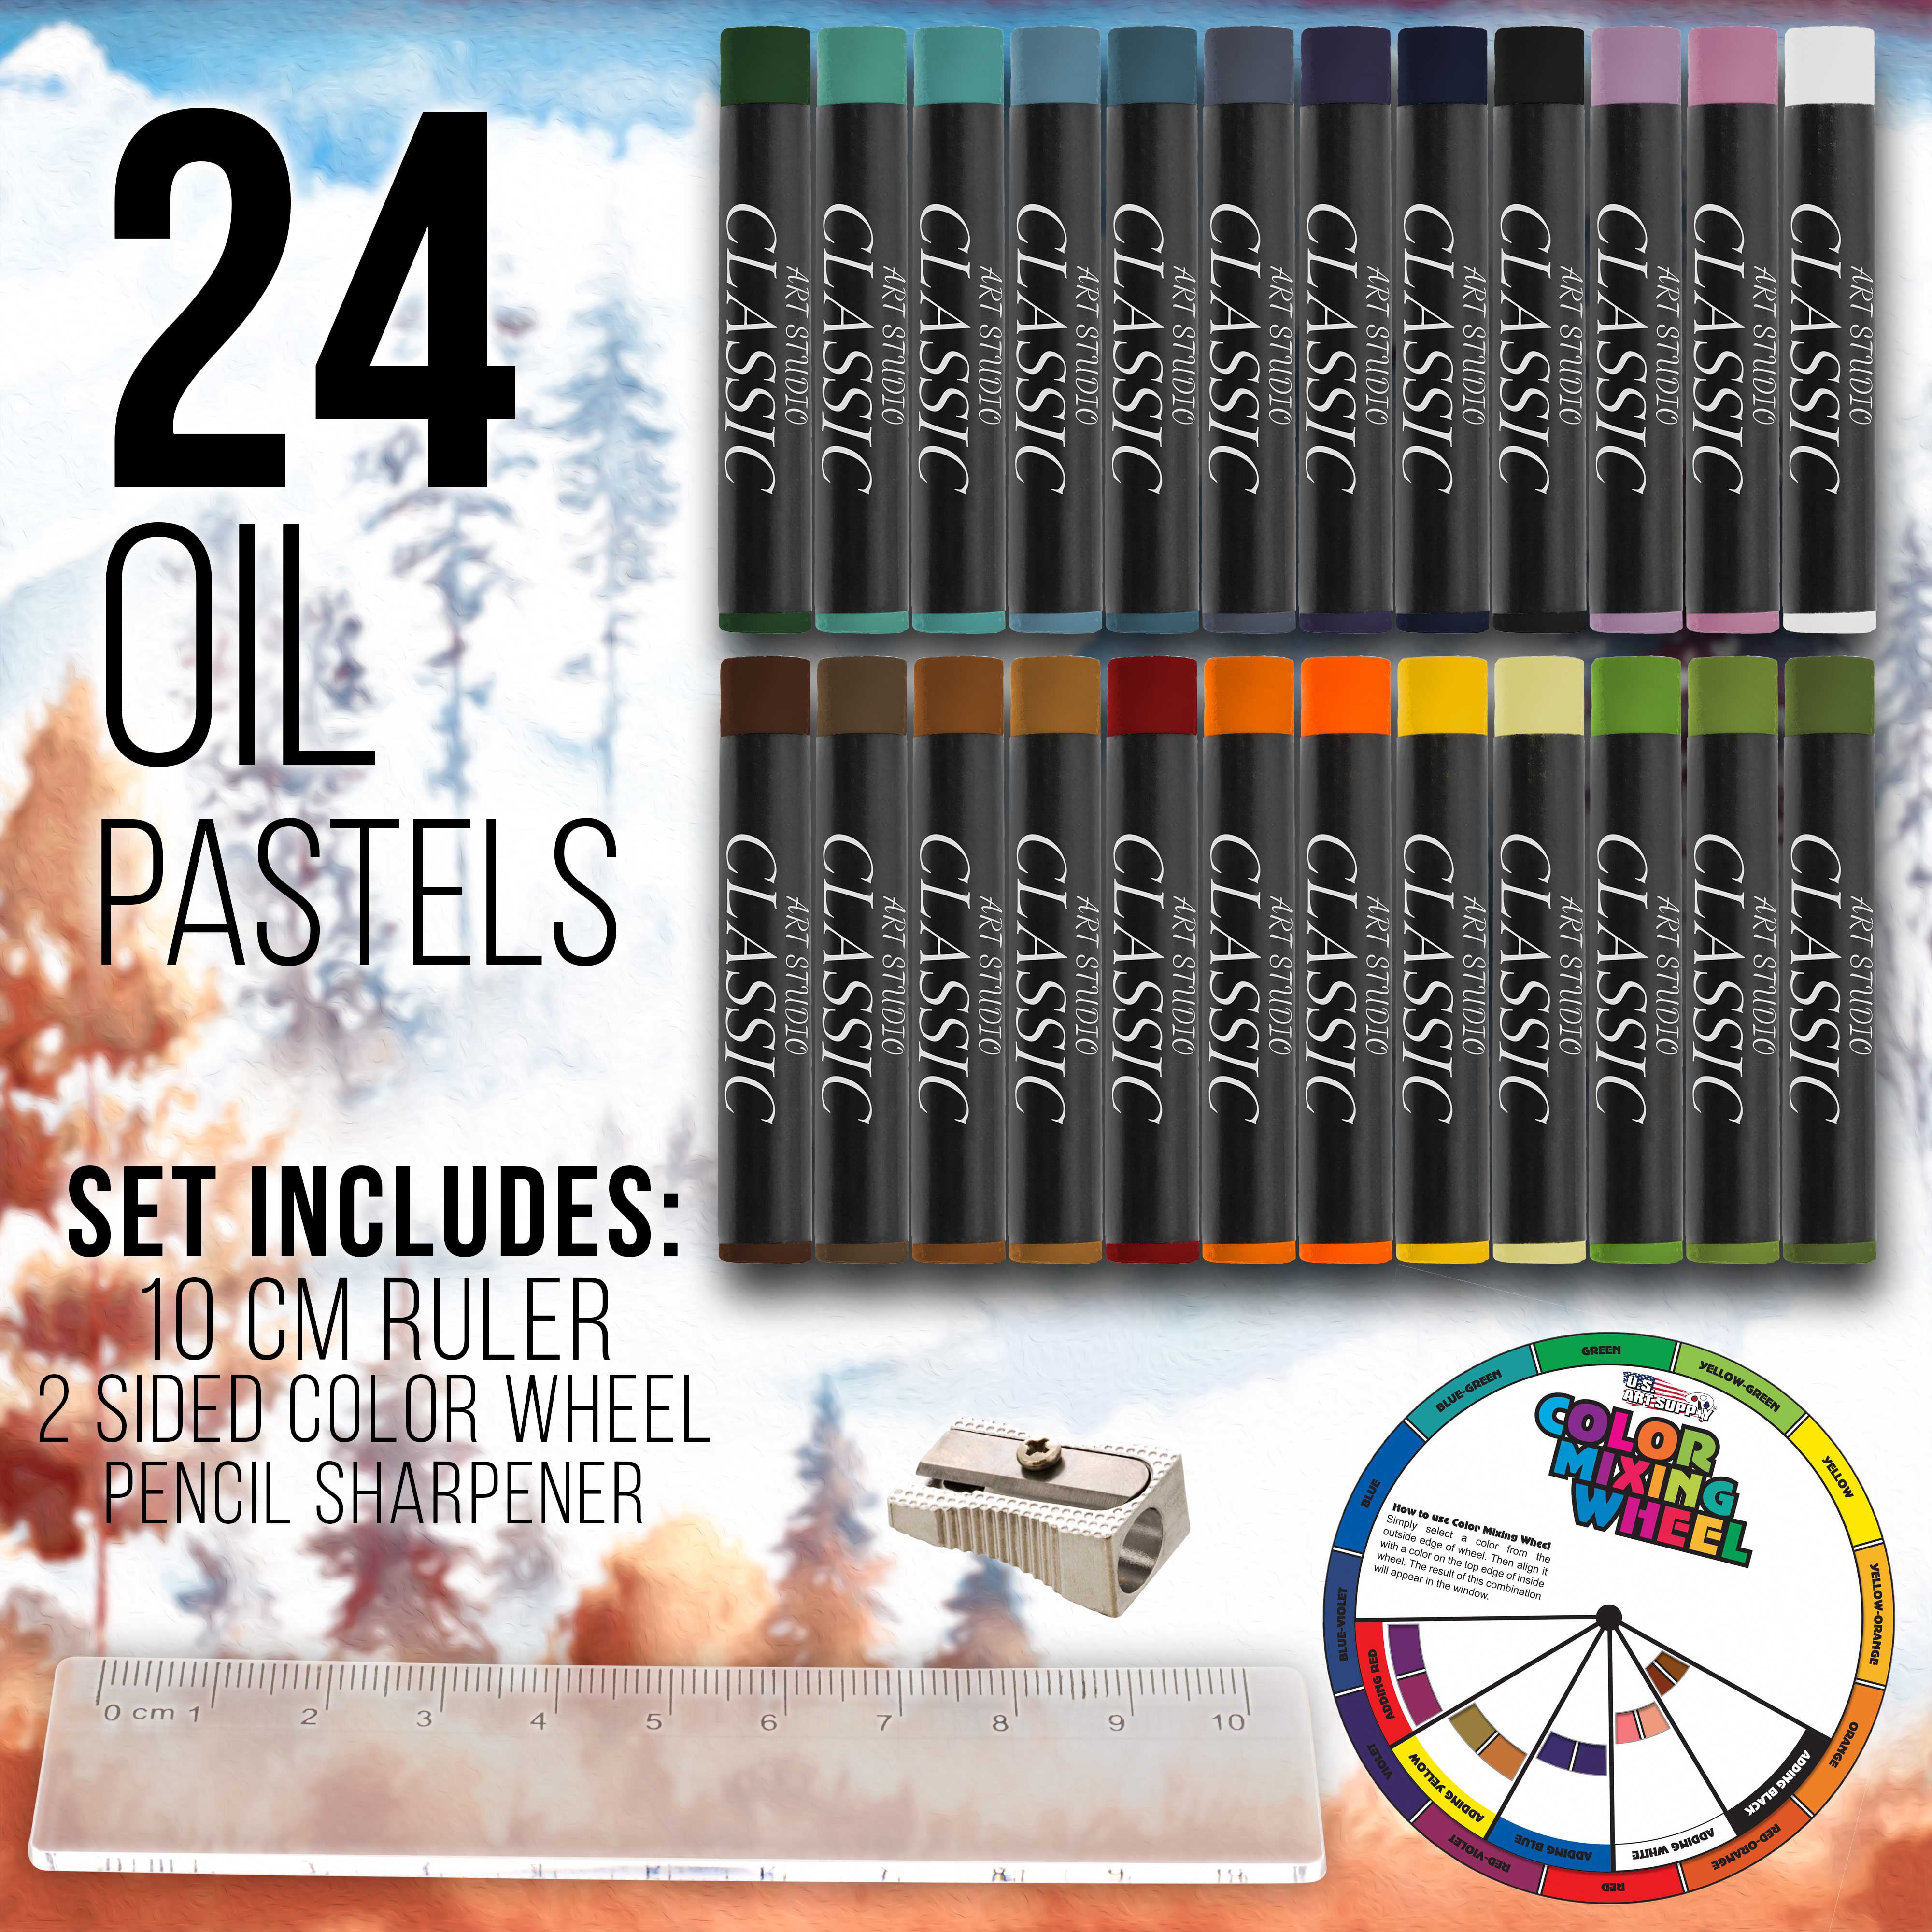 MAHITOI 82 PC Deluxe Art Set Compact Portable Wood case 24 Color Pencils 24  Oil Pastels 24 Watercolor 2 Brushes 2 Drawing Pencils a Pencil Sharpener  kneaded Eraser Sanding Blocks Art supply kit. : : Home